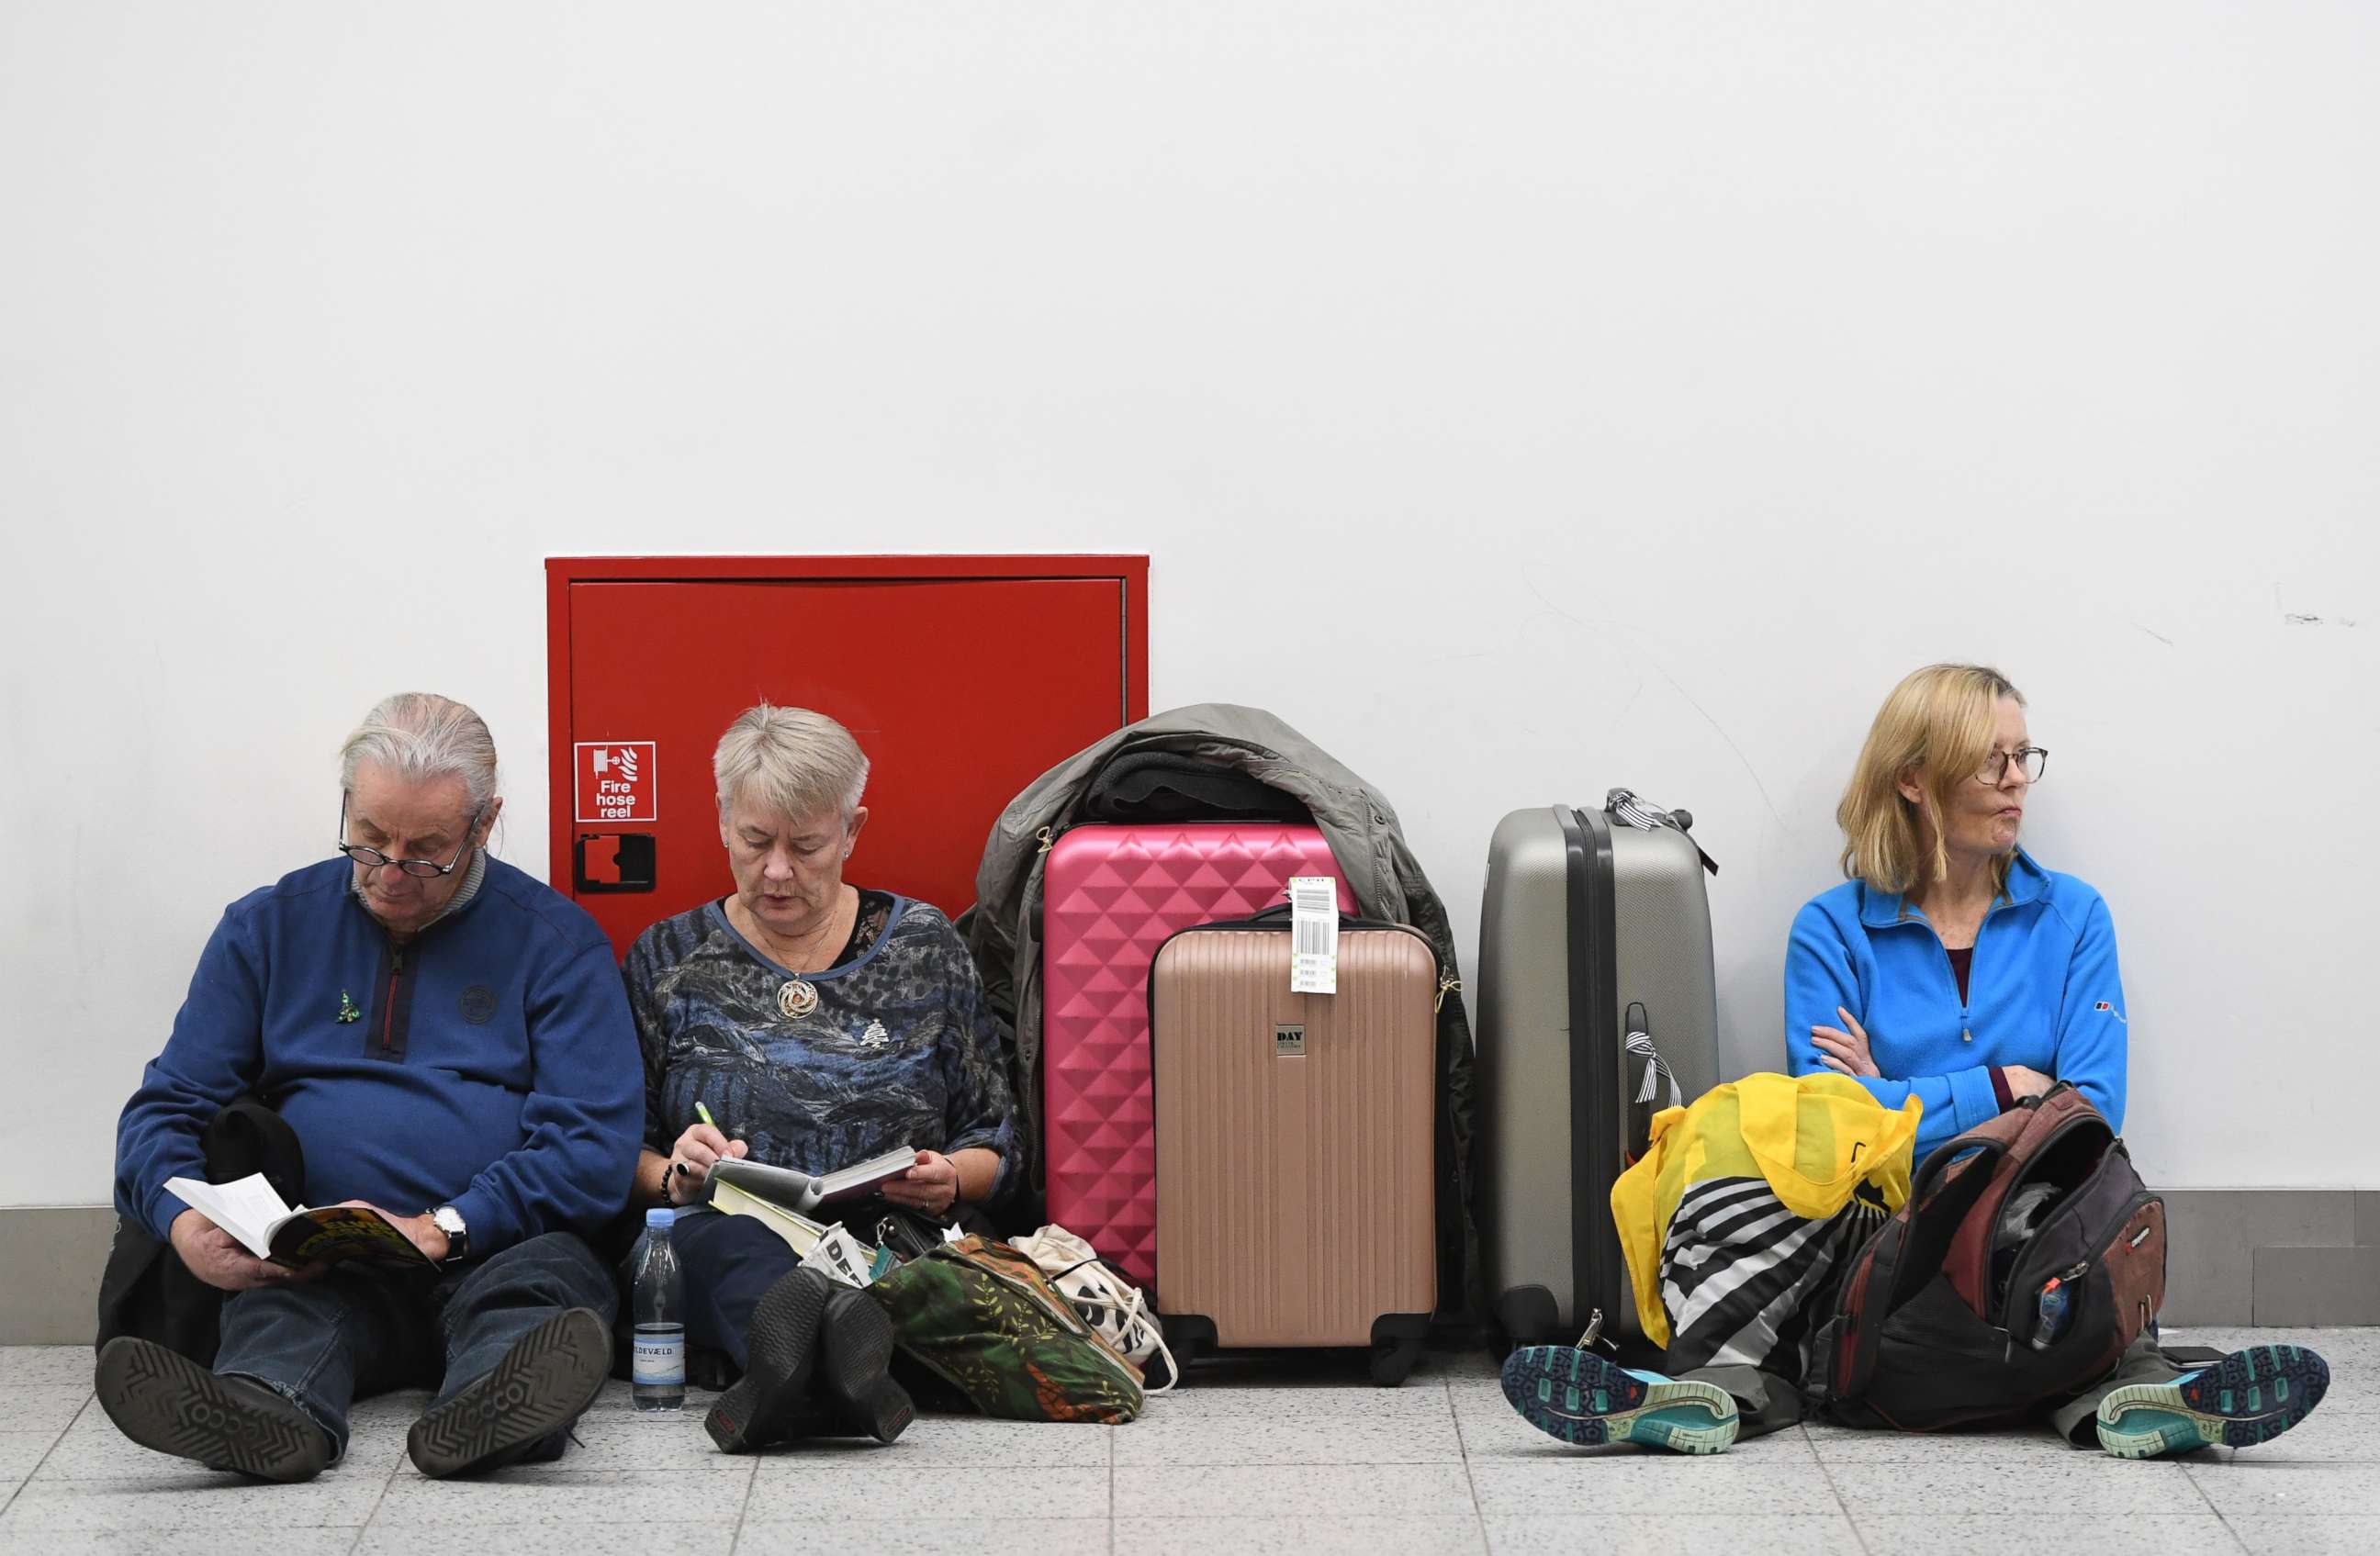 PHOTO: Passengers rest with their luggage at the Gatwick airport in Sussex, southeast, England, Dec. 21, 2018.